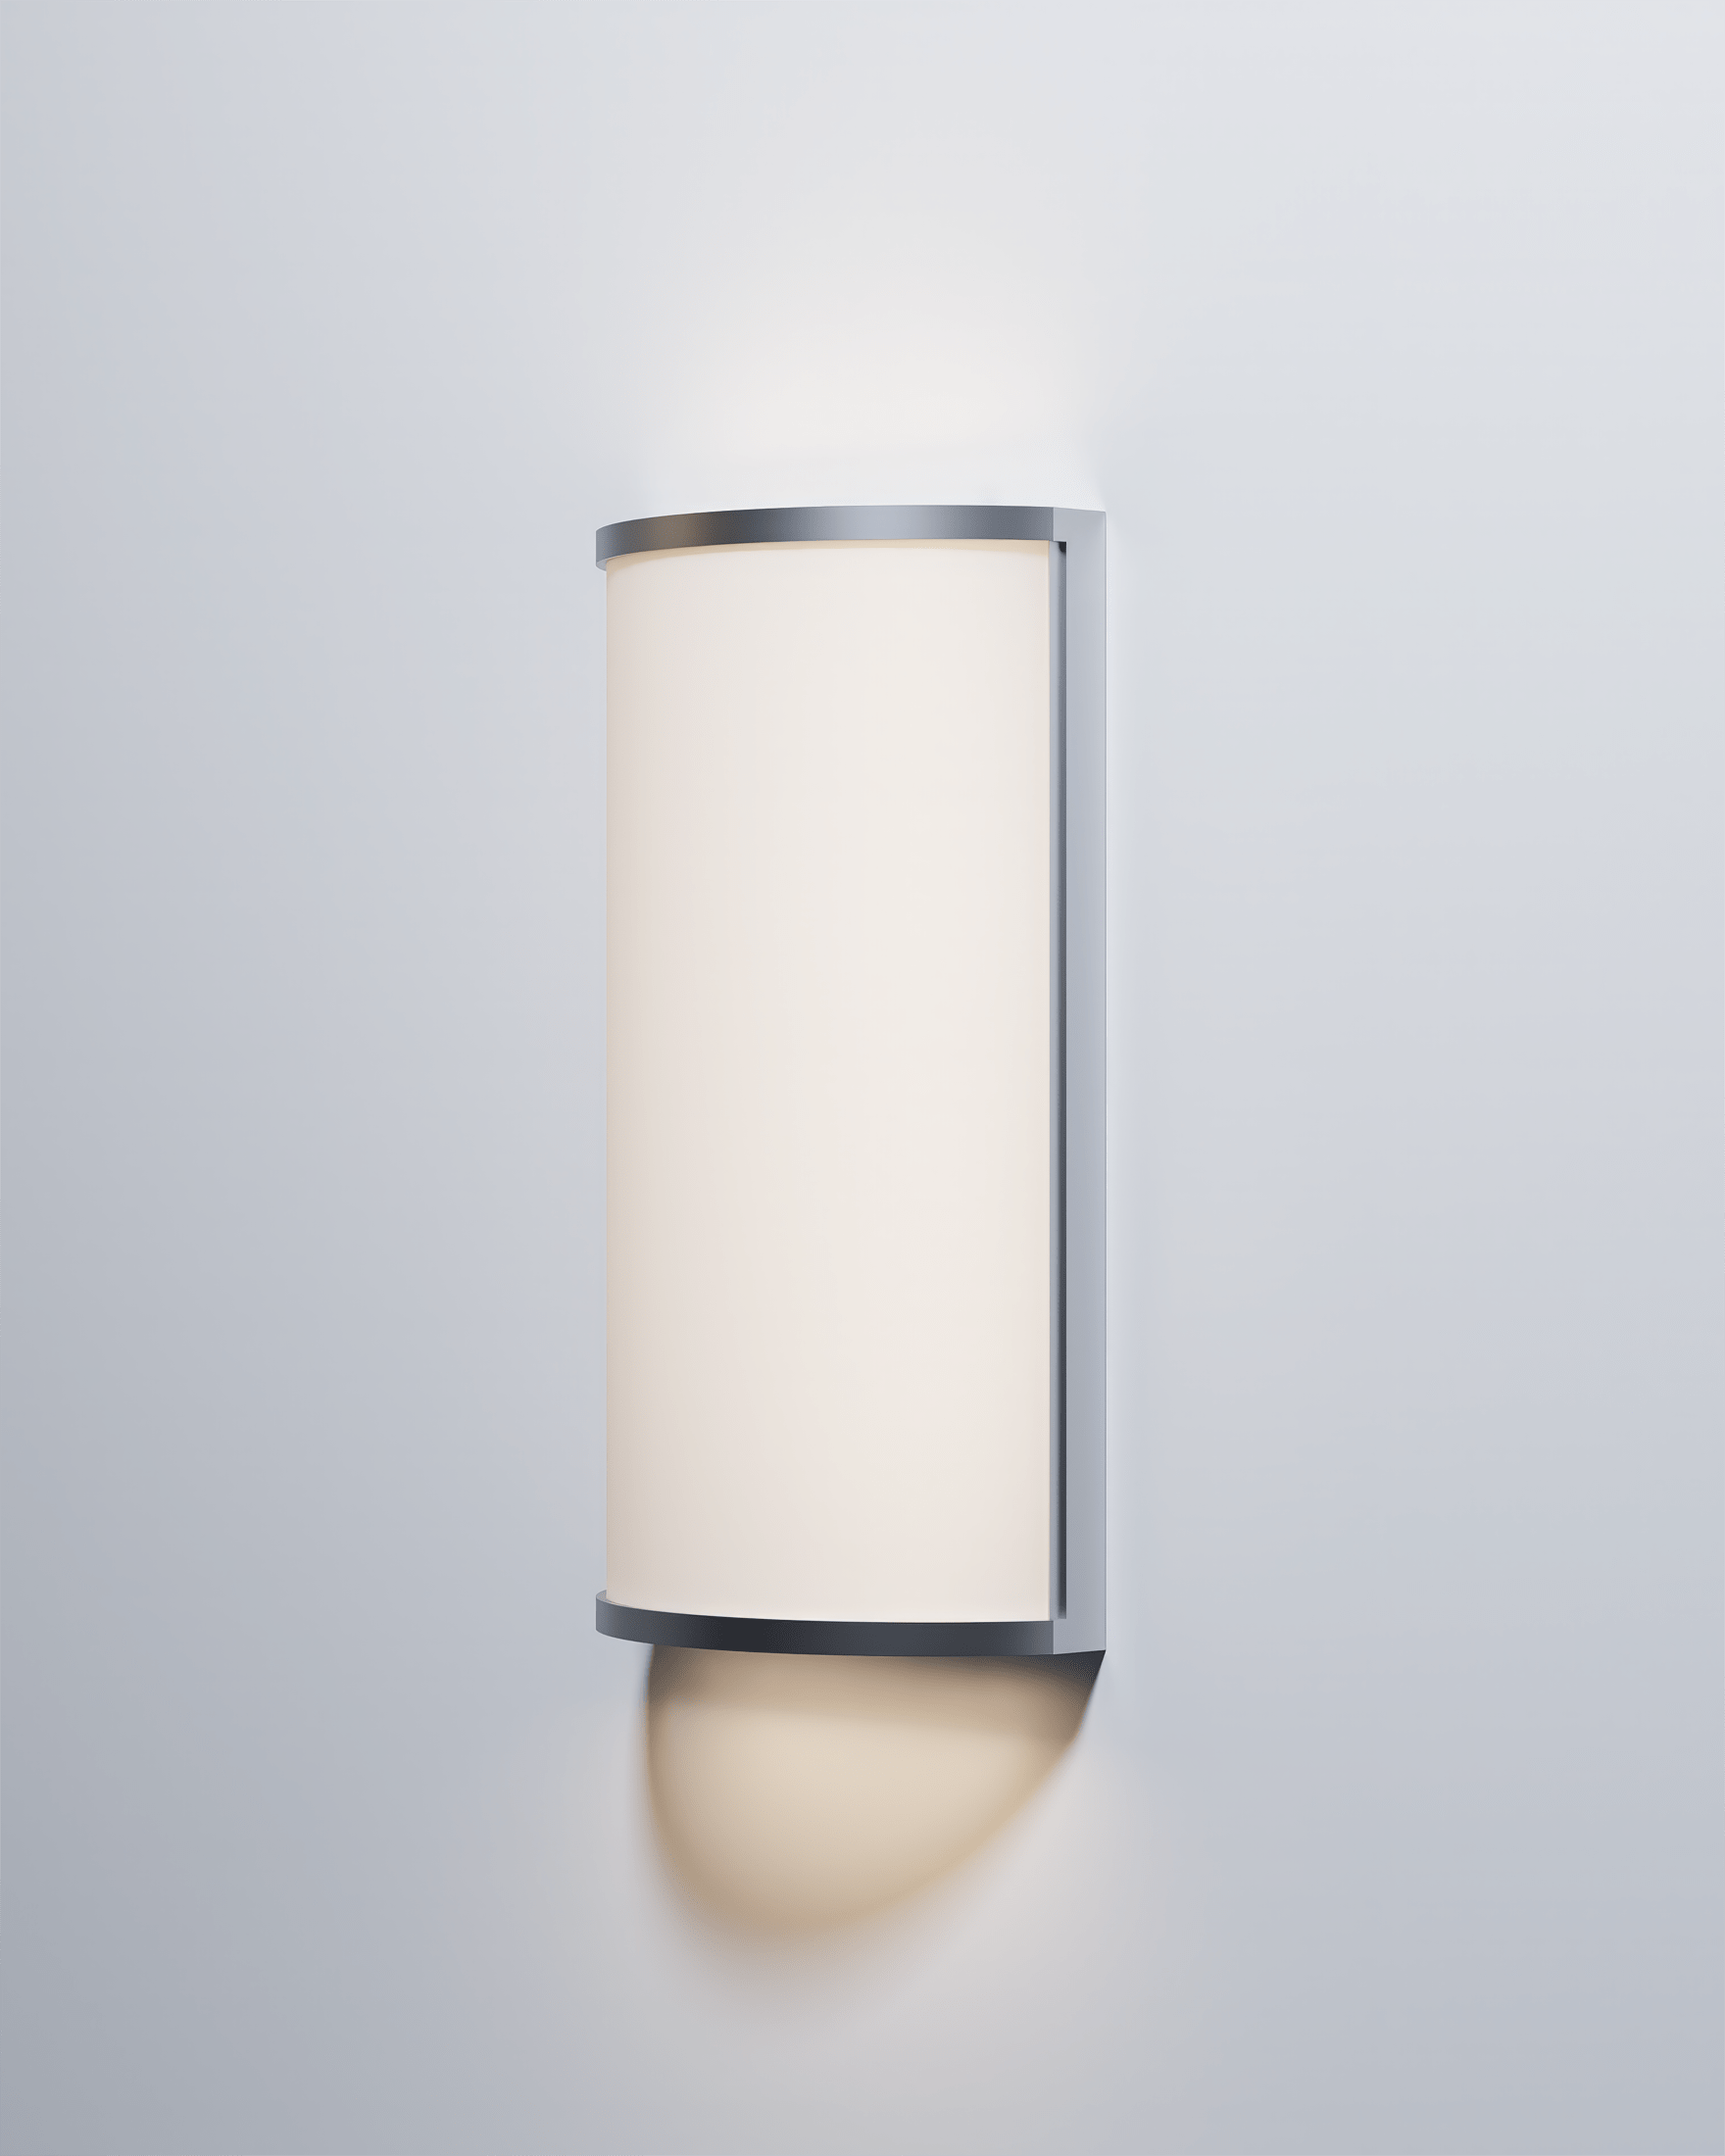 16.Coral Wall Light 16in 24W_Modified-min.png__PID:3e068f60-6f01-494f-a46d-696eac1fa4f6